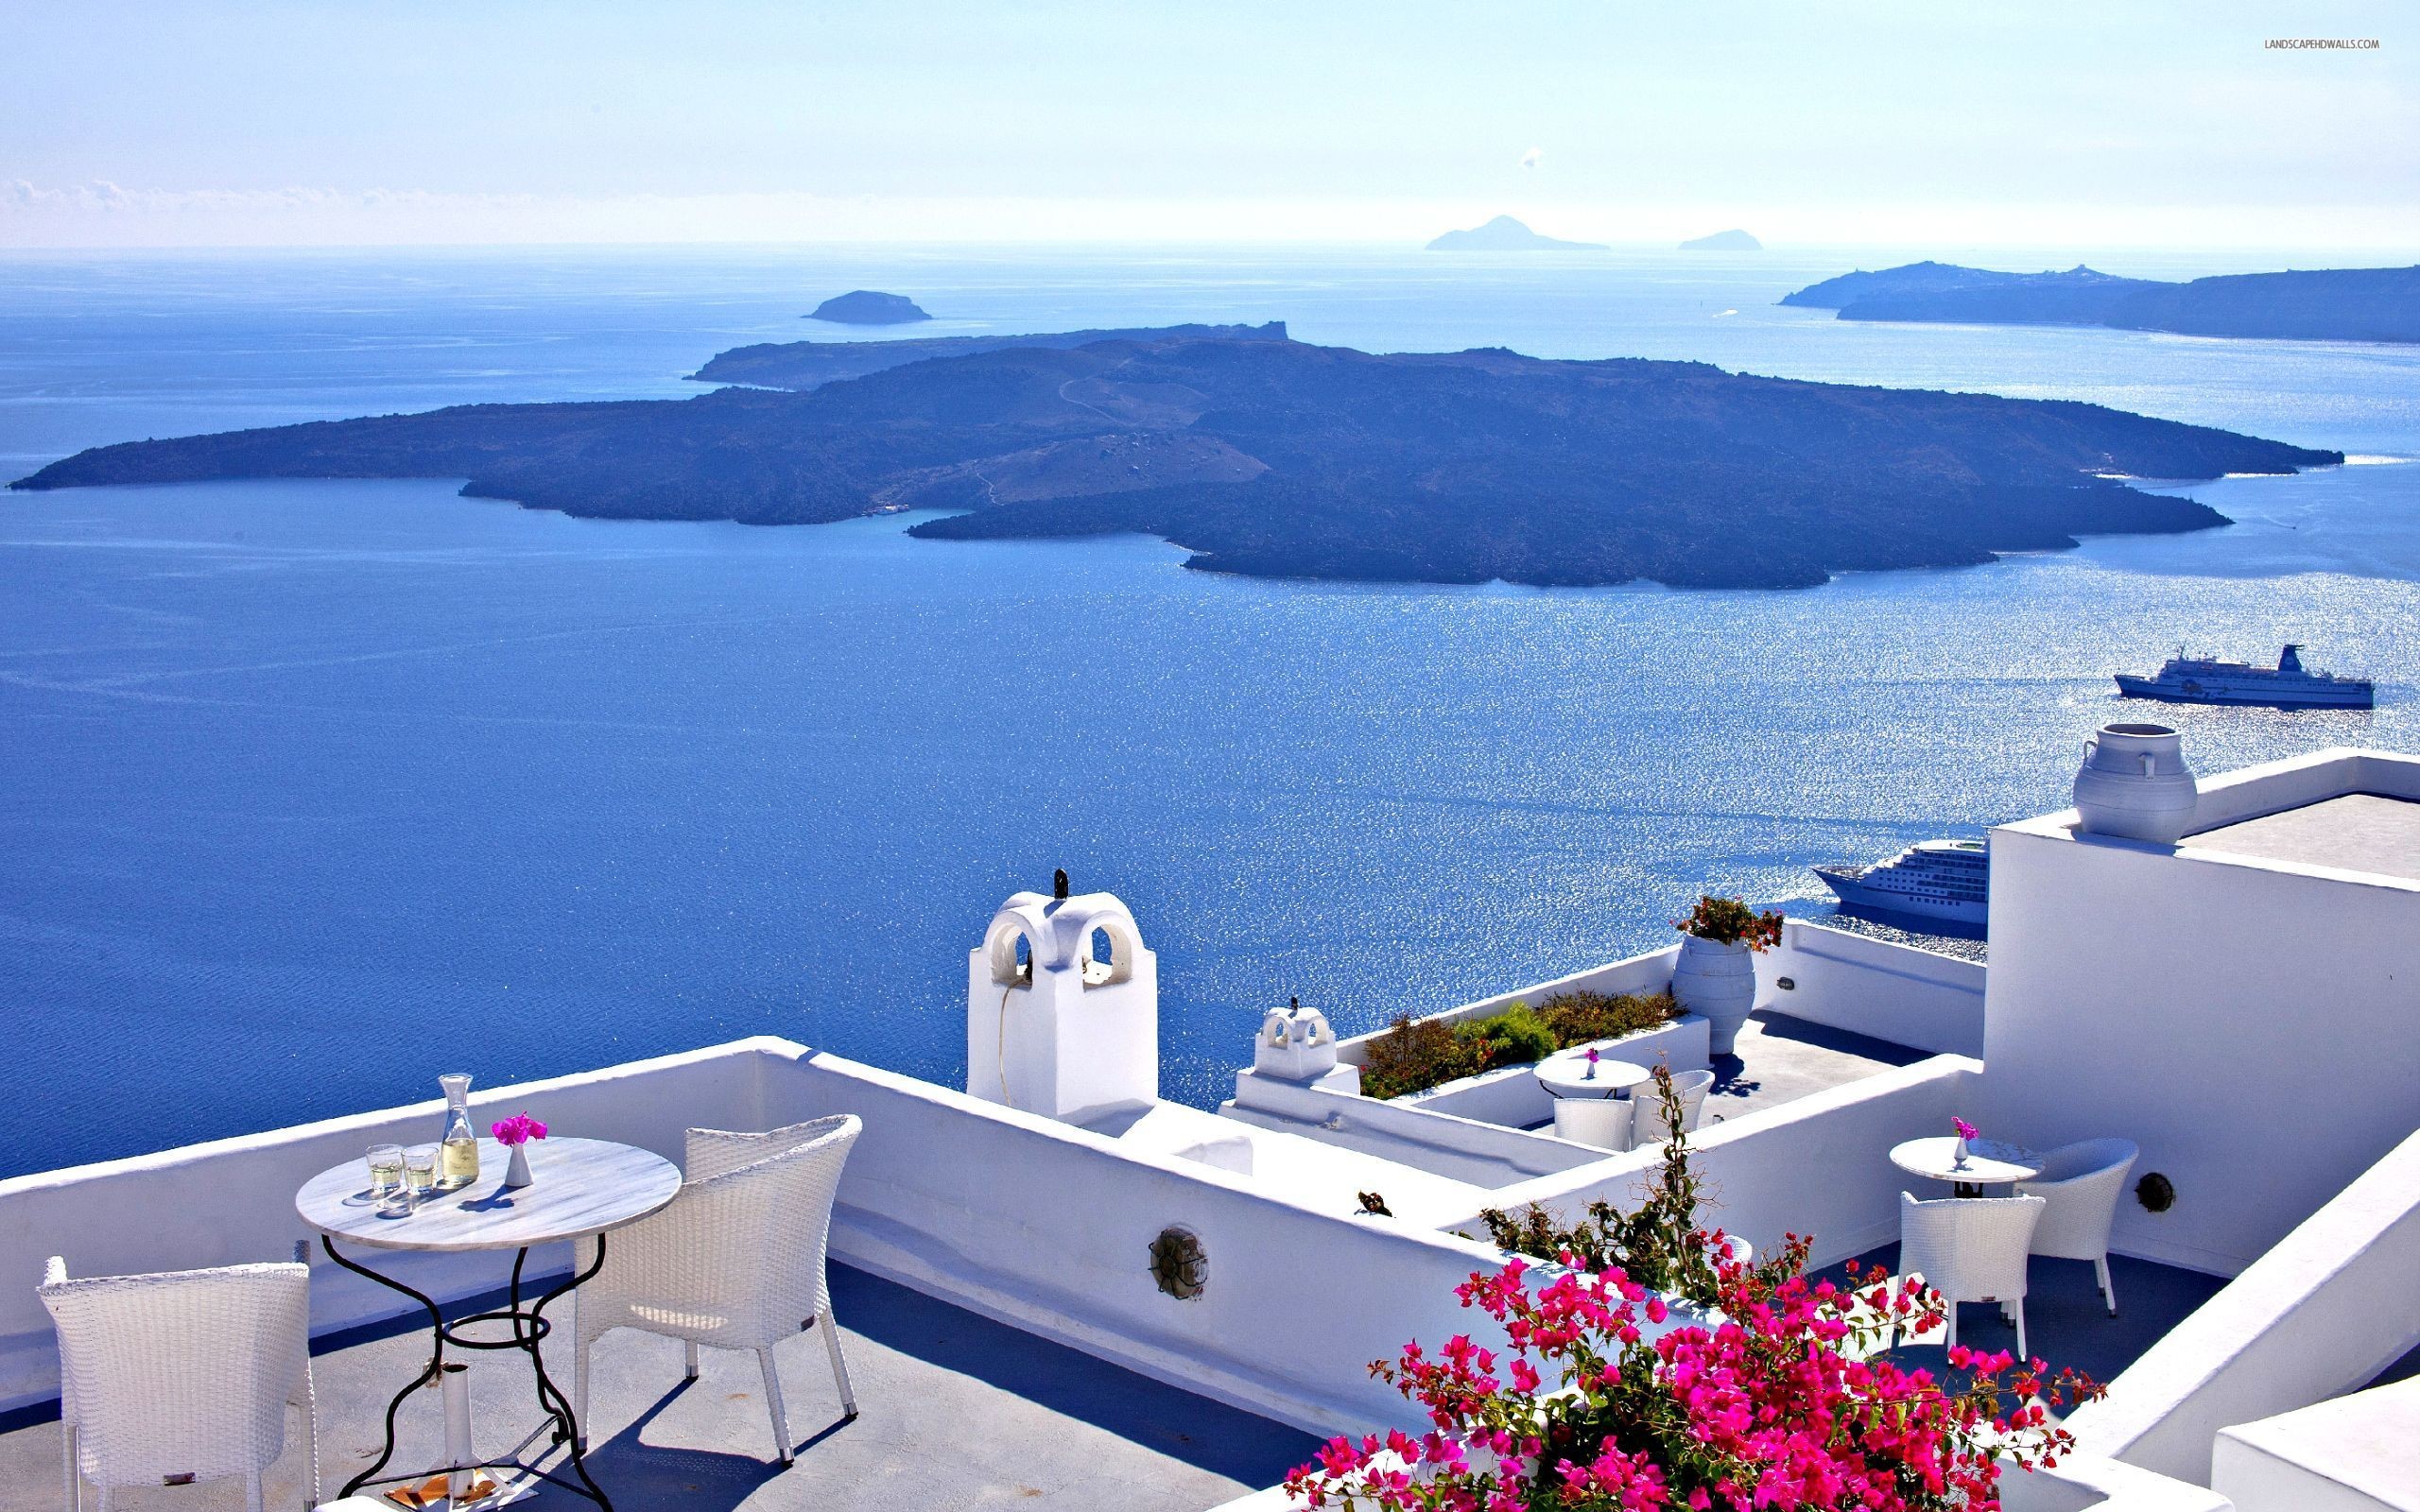 2560x1600 It doesn't even necessarily have to be Santorini, it could be anywhere.